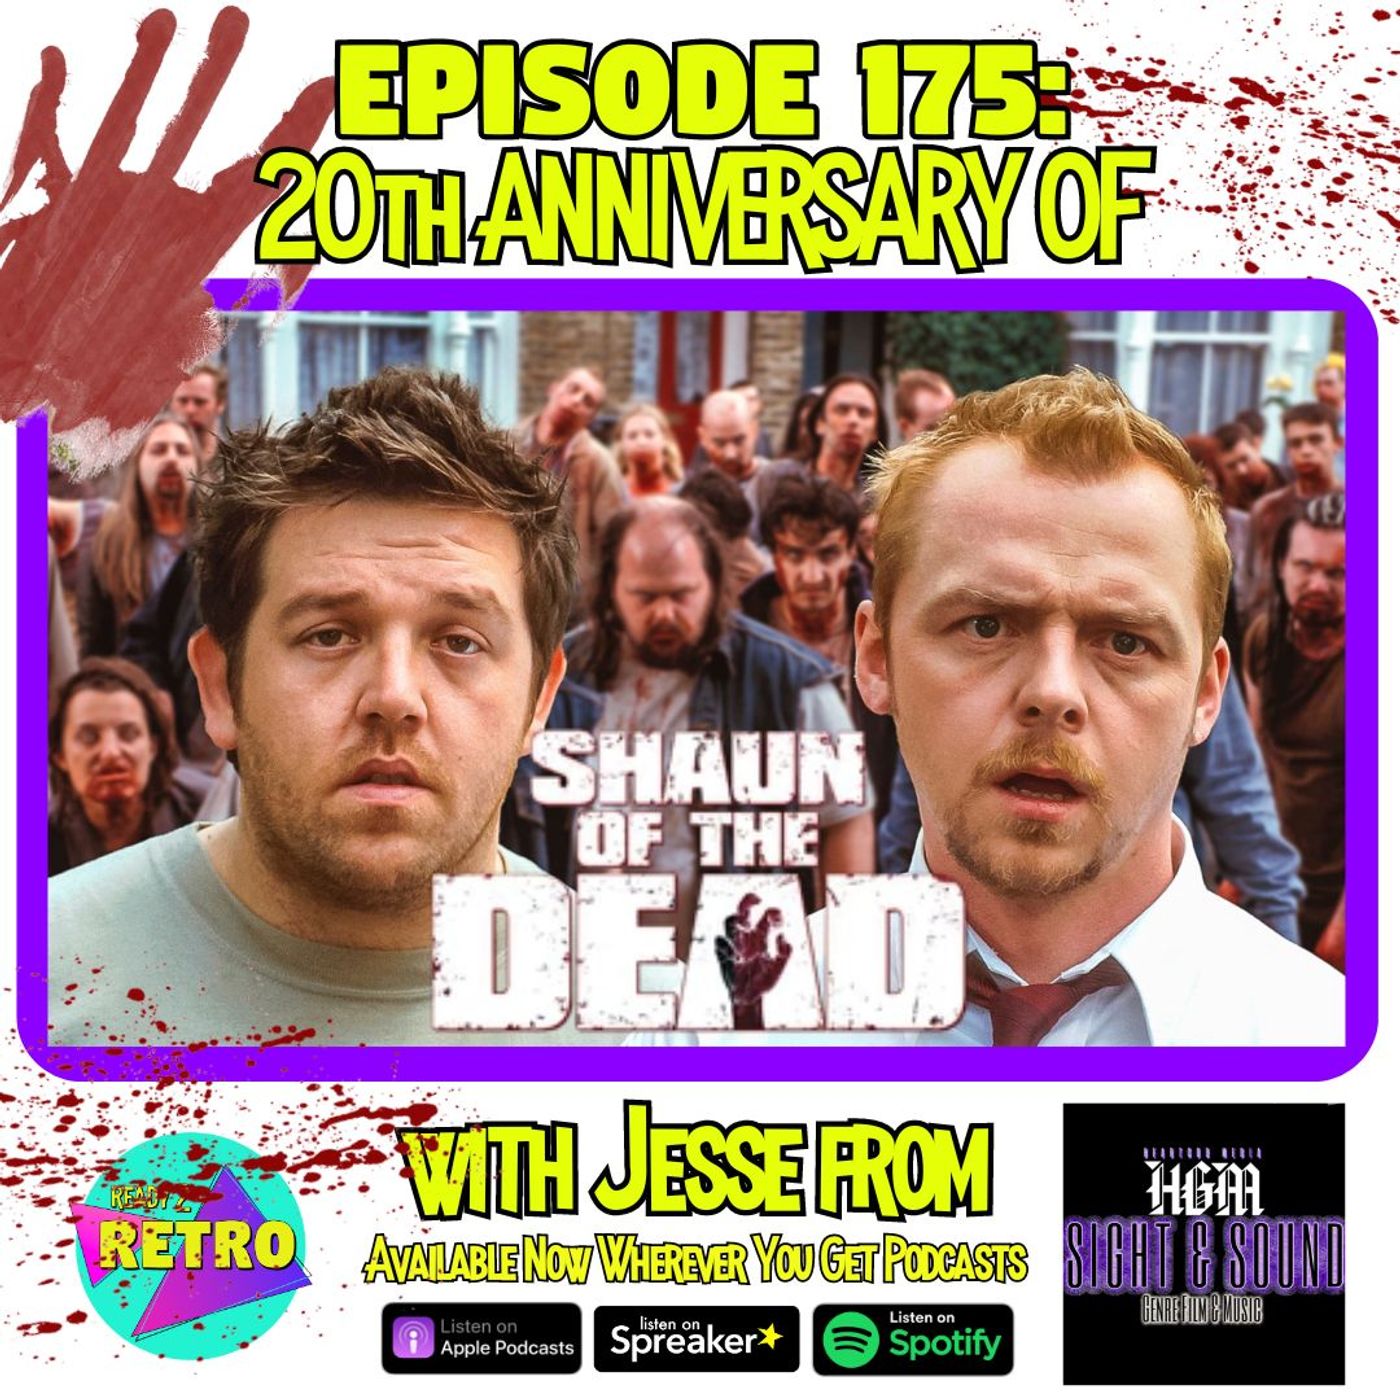 Episode 175: 20th Anniversary of ”Shaun of the Dead” with Jesse from @heartgodmedia